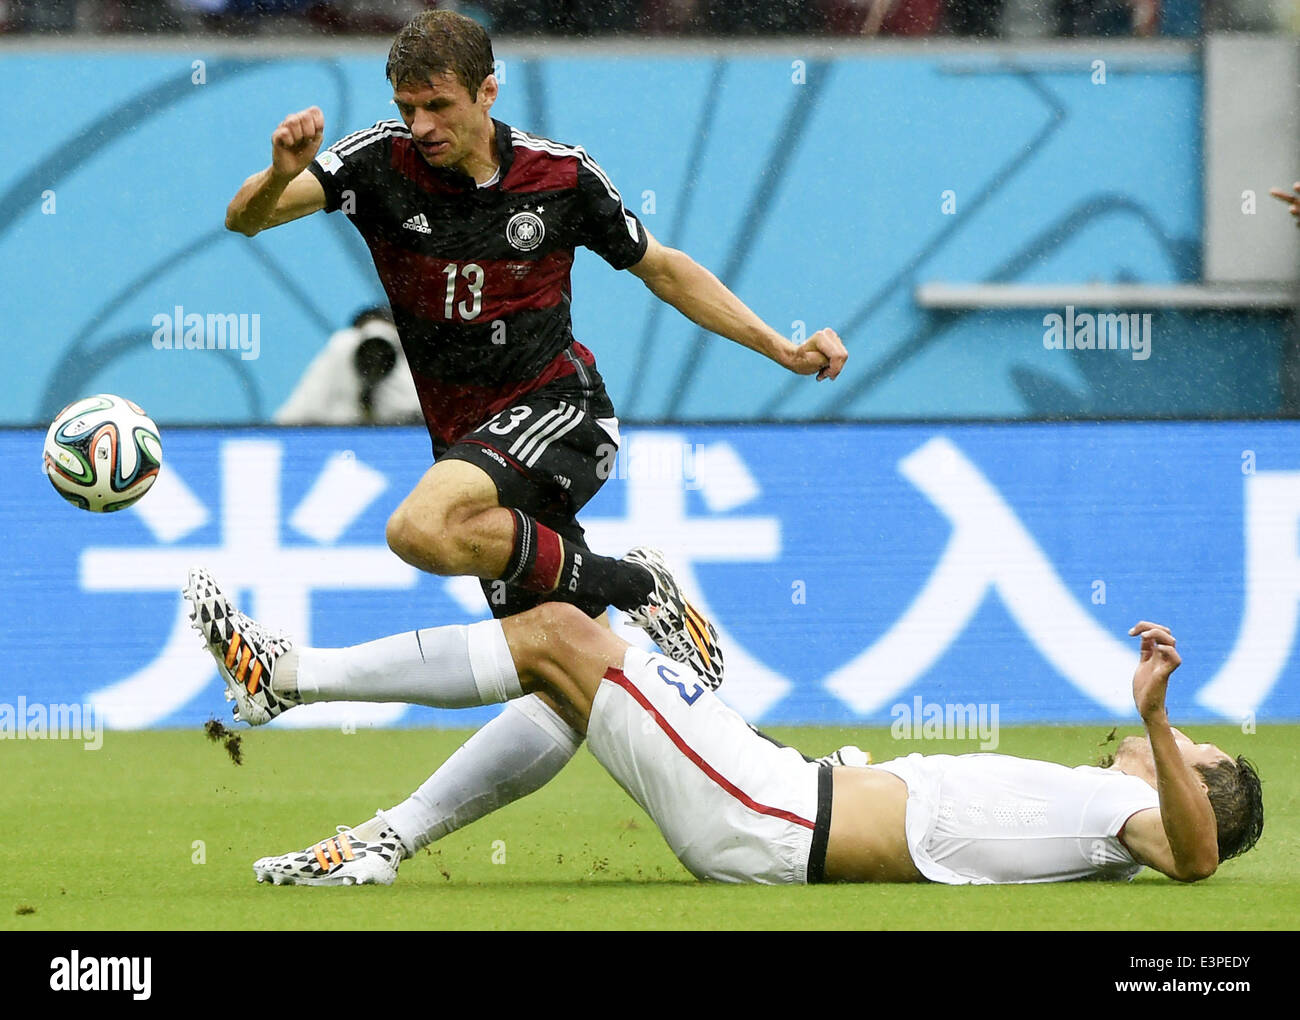 Recife, Brazil. 26th June, 2014. Omar Gonzalez of the U.S. (R) tackles the ball controlled by Germany's Thomas Muller during a Group G match between the U.S. and Germany of 2014 FIFA World Cup at the Arena Pernambuco Stadium in Recife, Brazil, on June 26, 2014. Credit:  Lui Siu Wai/Xinhua/Alamy Live News Stock Photo